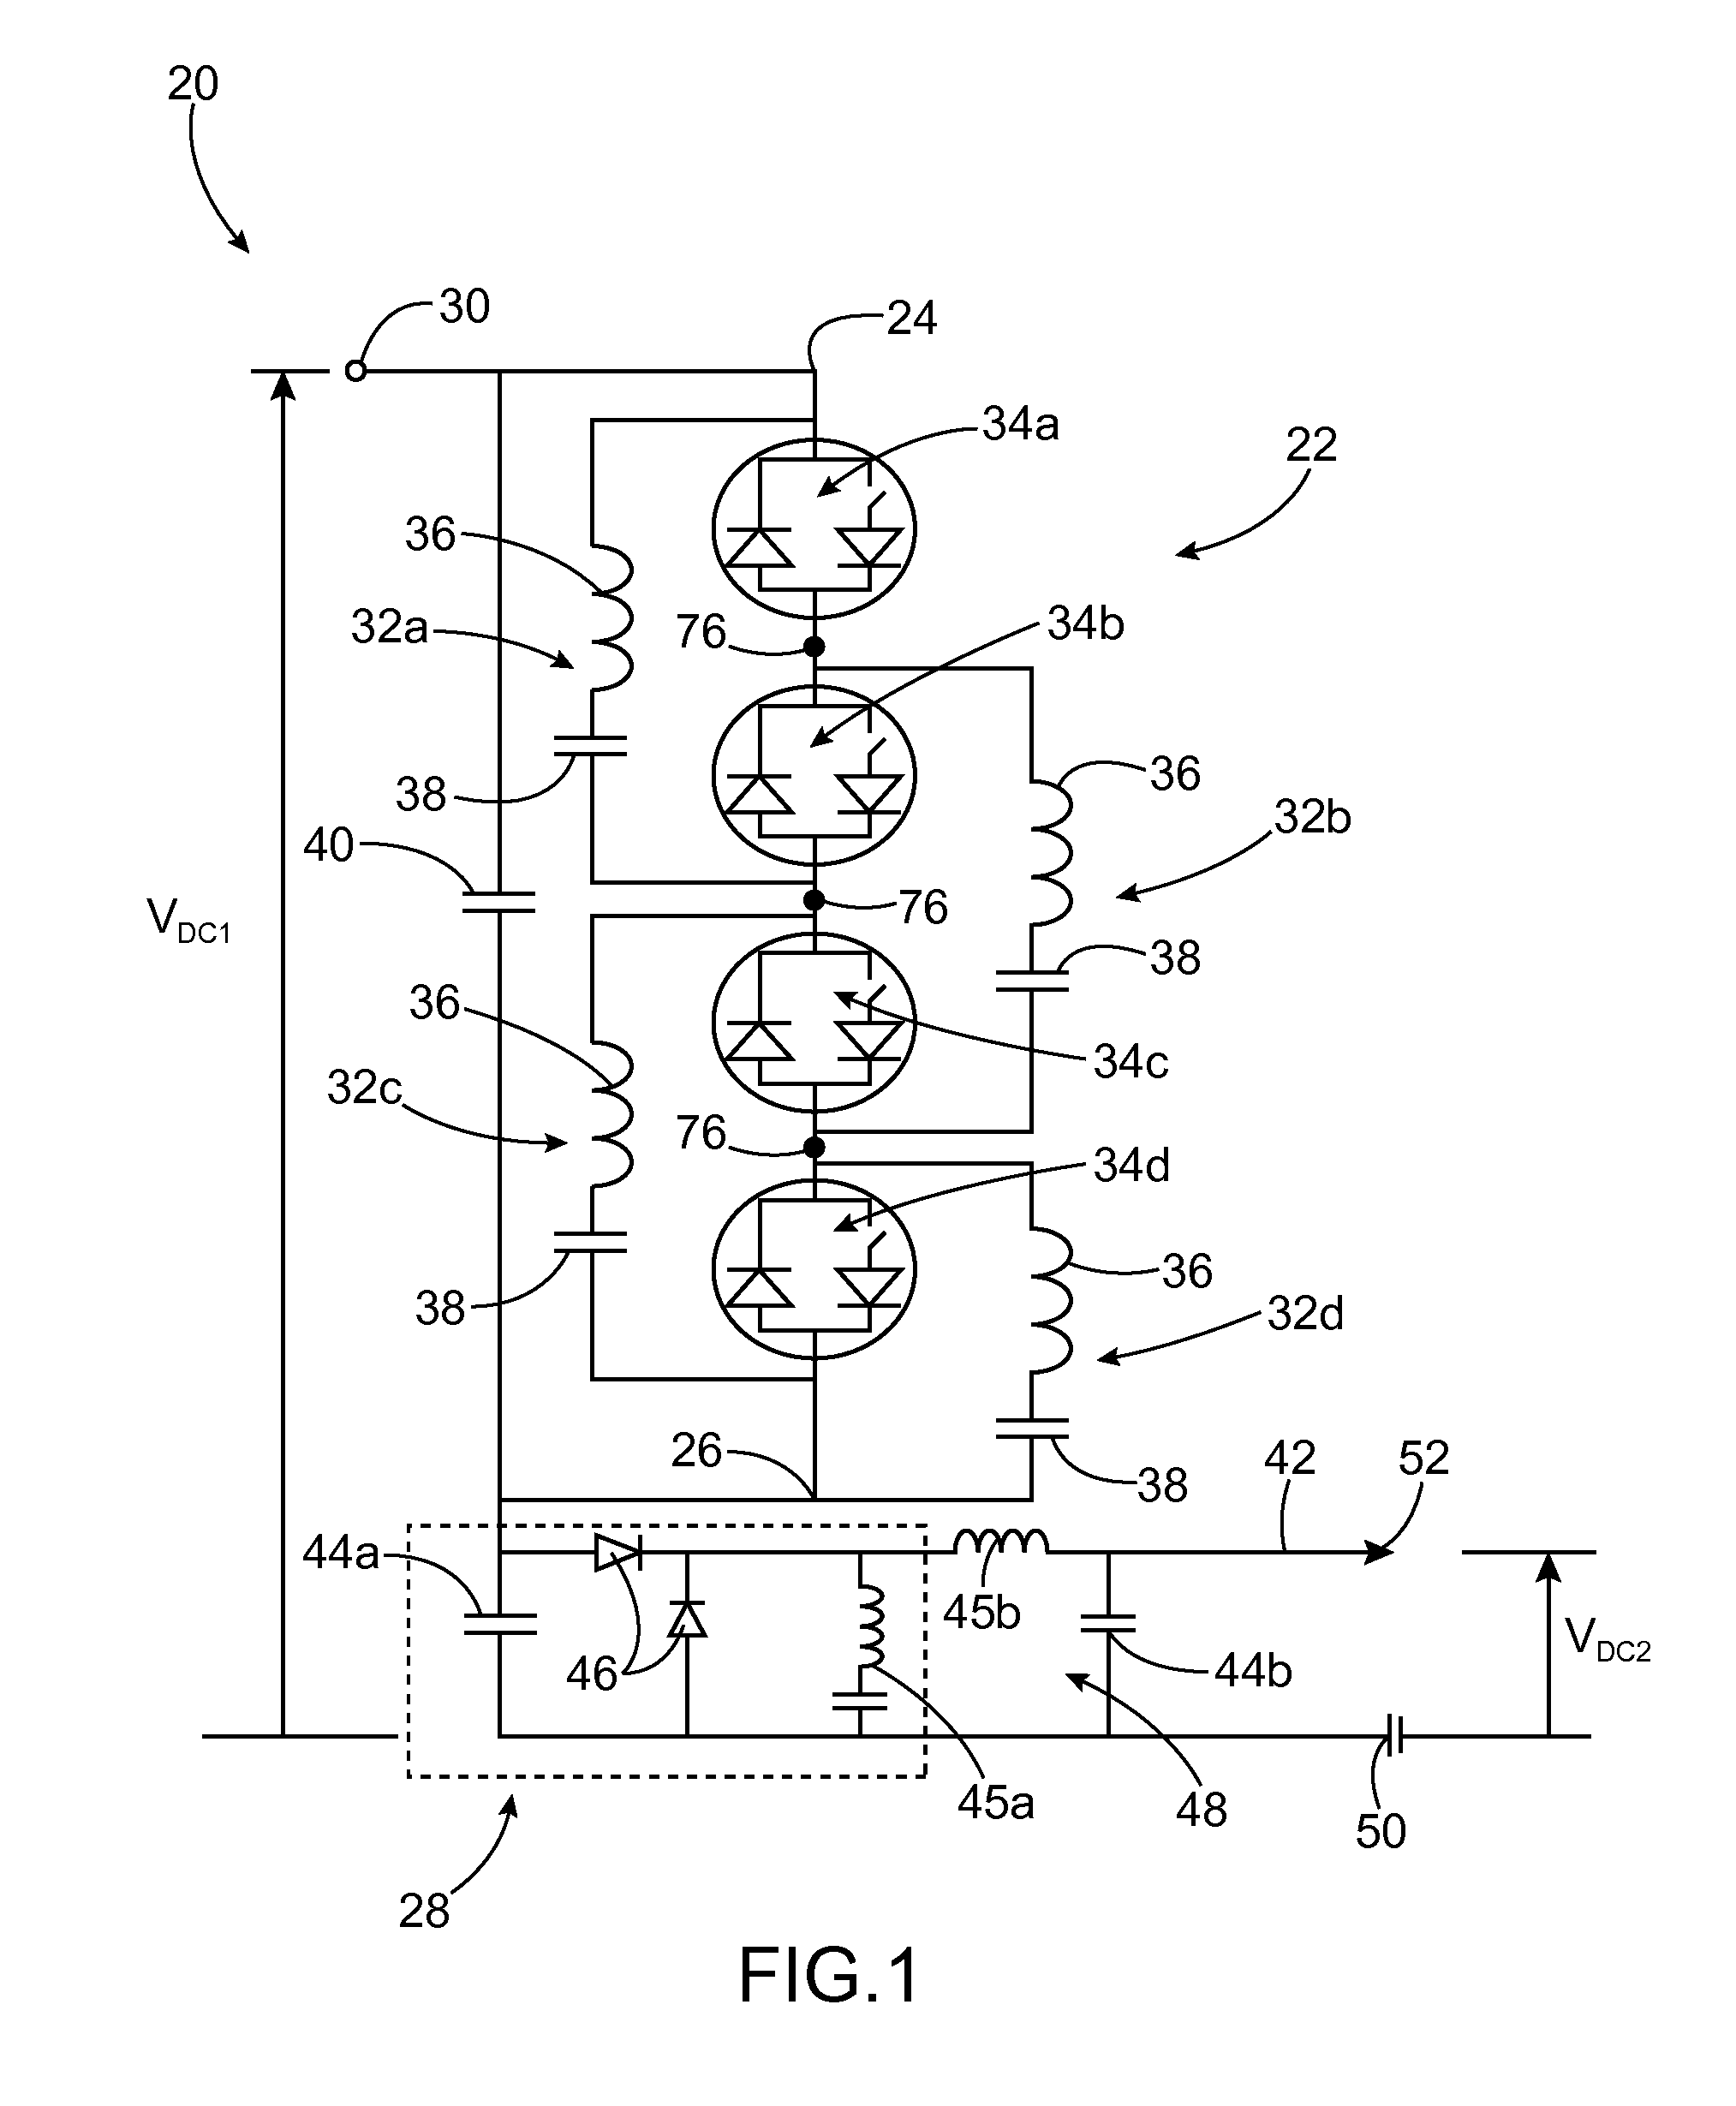 High Voltage DC/DC Converter With Cascaded Resonant Tanks